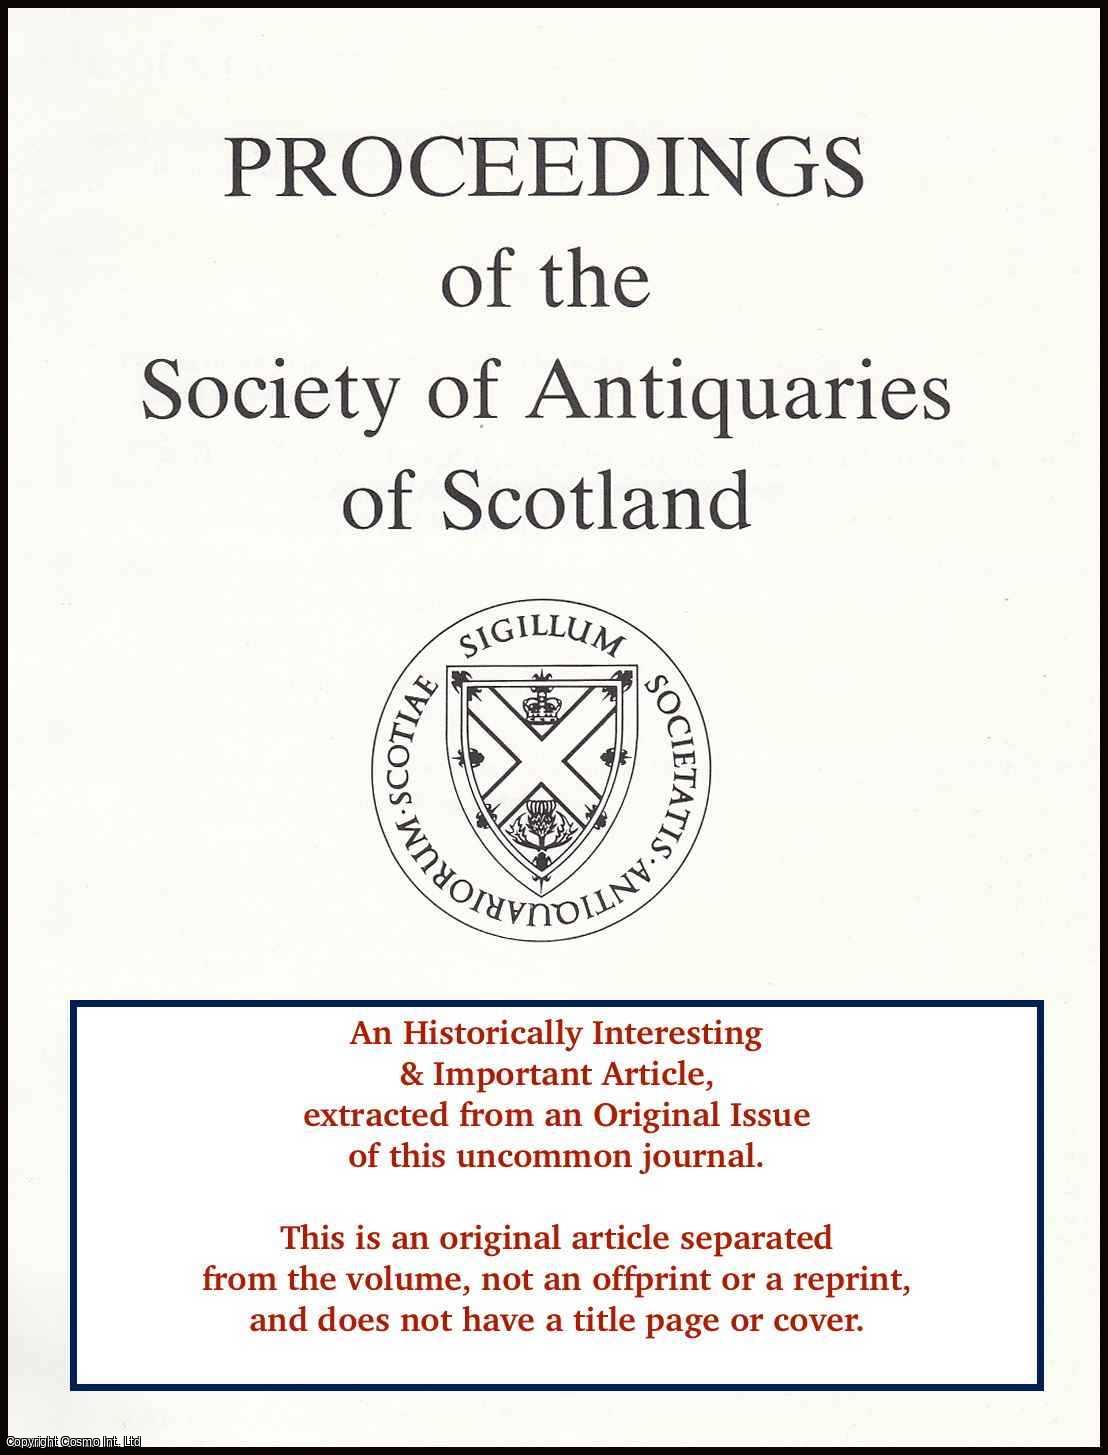 R.C. Barcham - A Lost Radiocarbon Date for Shetland. An original article from the Proceedings of the Society of Antiquaries of Scotland, 1980.